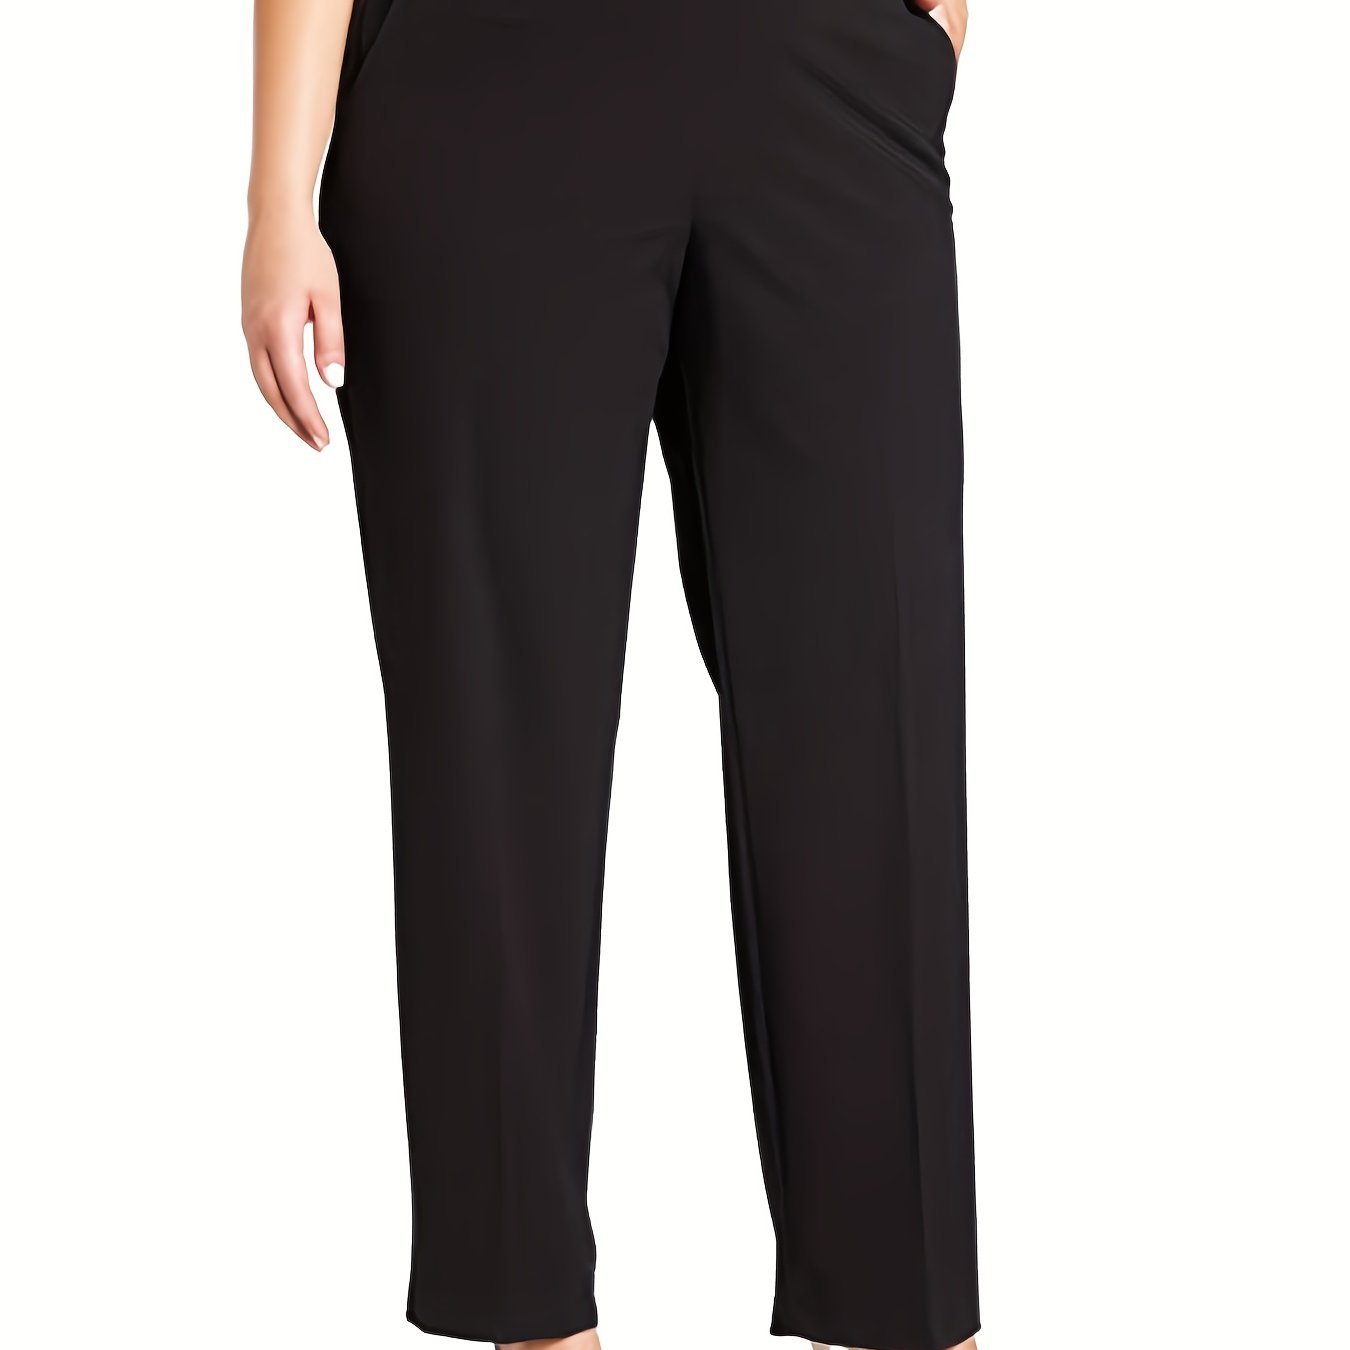 Plus Size Casual Pants, Women's Plus Solid High Stretch Straight Leg Pants With Pockets black